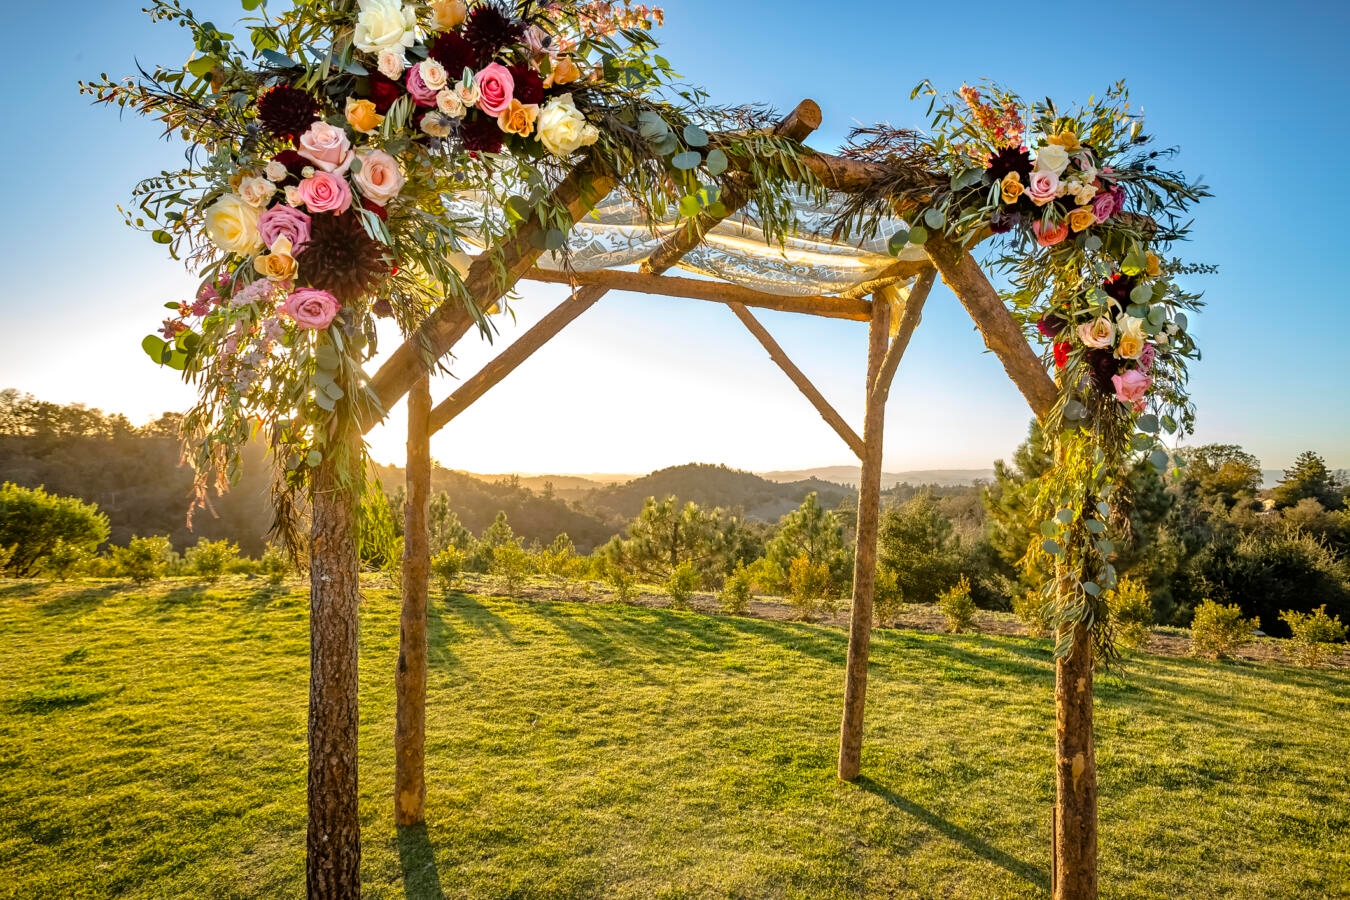 photo of a Jewish wedding canopy outdoors at sunset